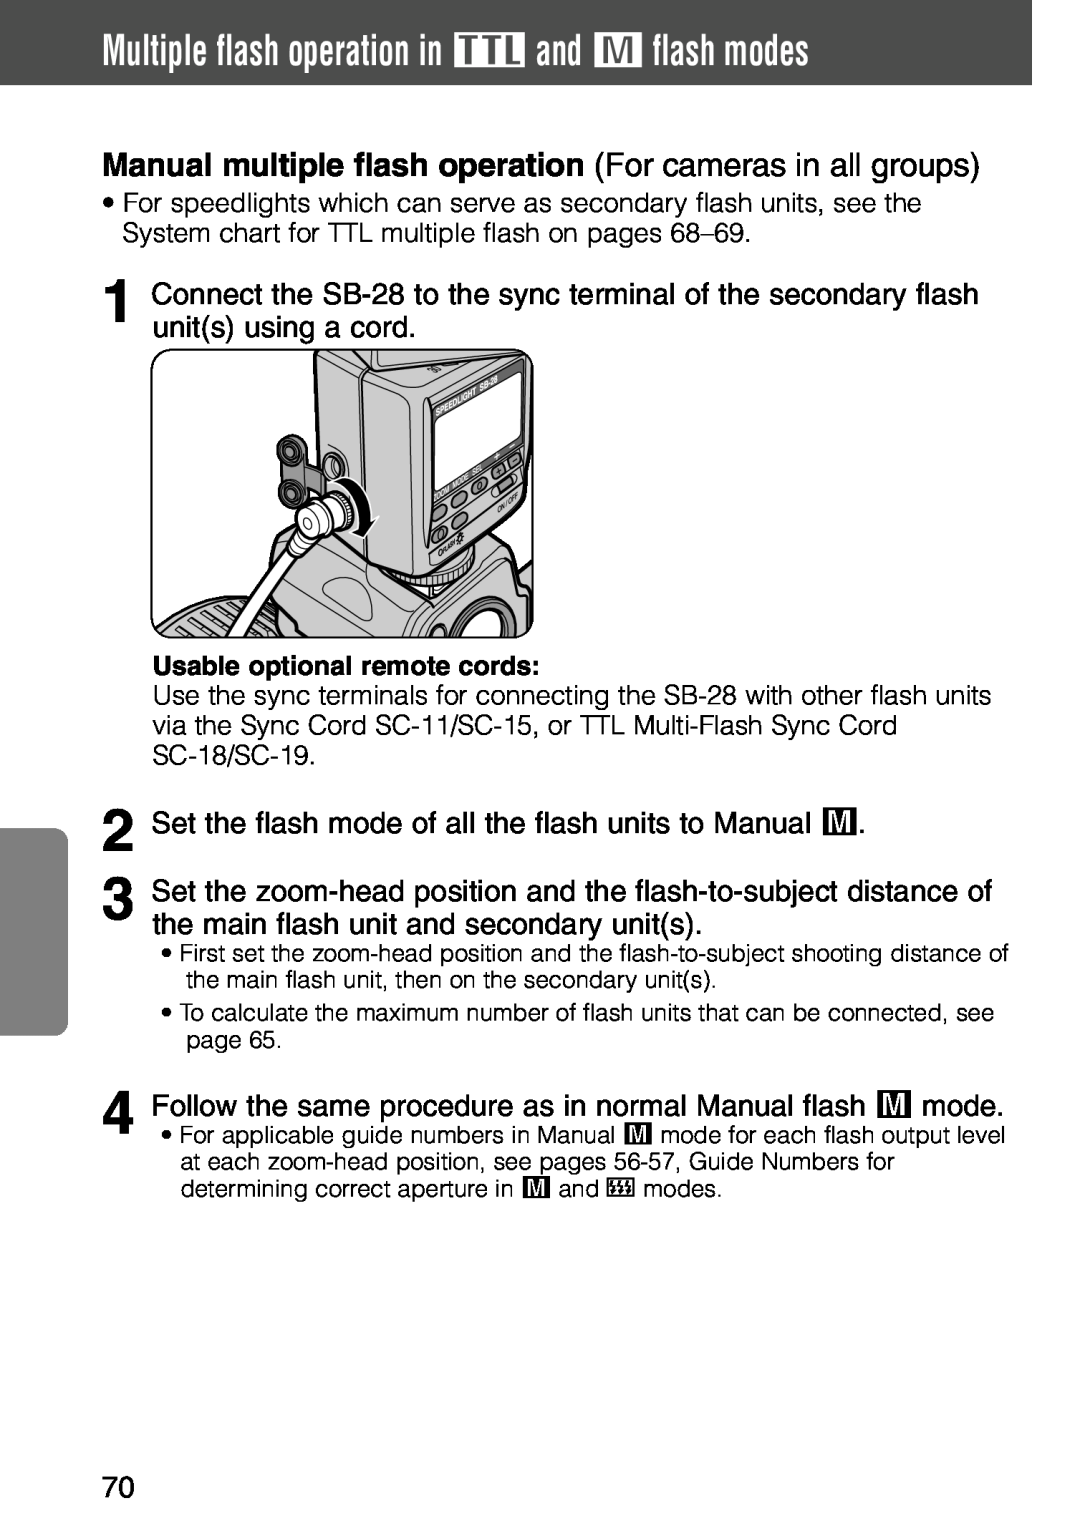 Nikon SB-28 instruction manual Multiple flash operation in t and ƒ flash modes 